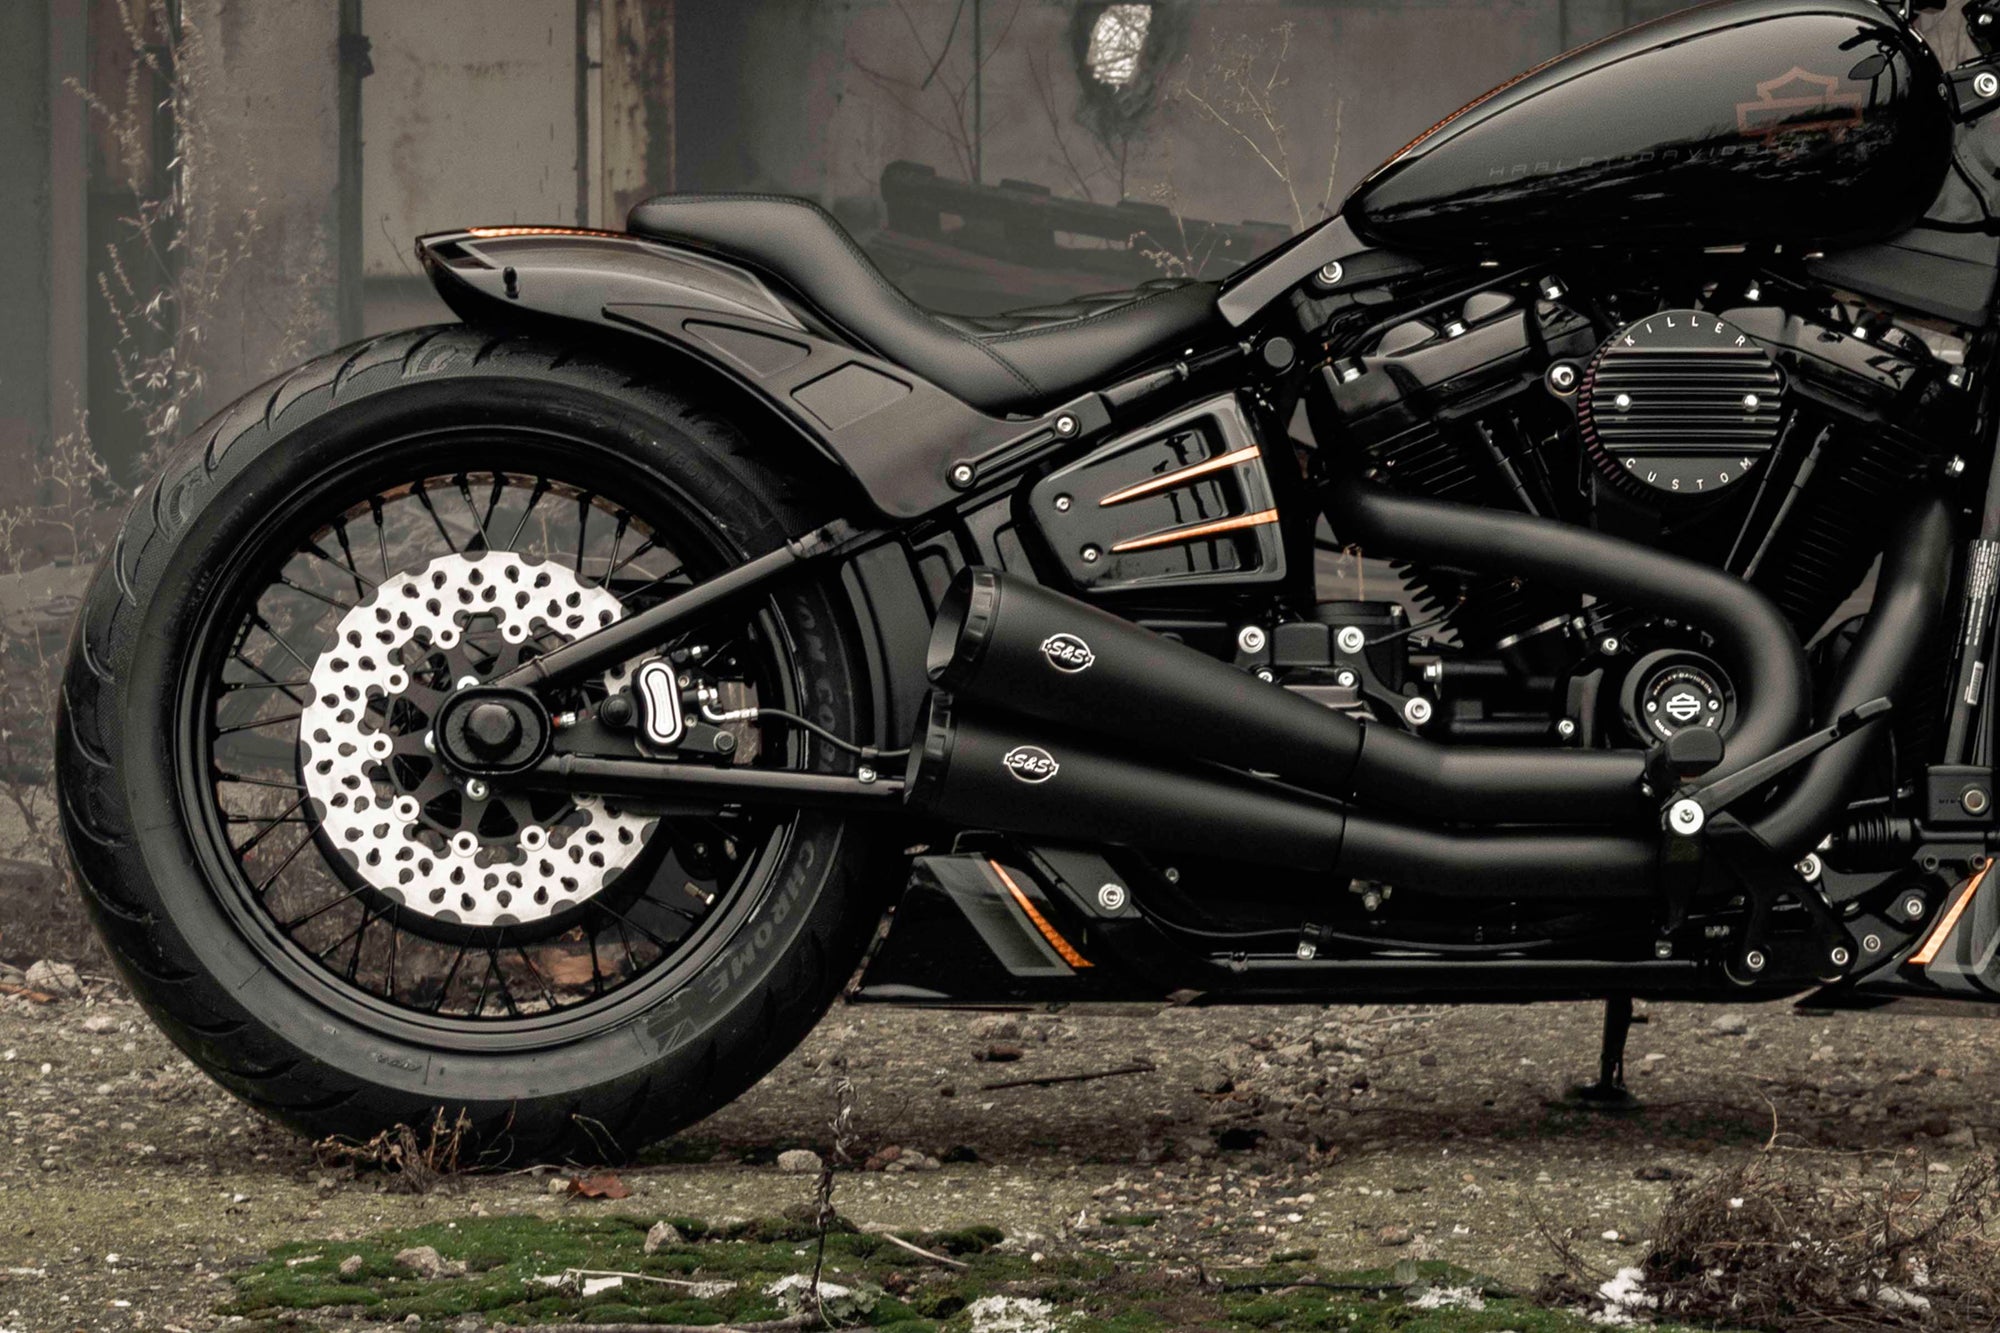 Zoomed Harley Davidson motorcycle with Killer Custom parts from the side outside in an abandoned environment